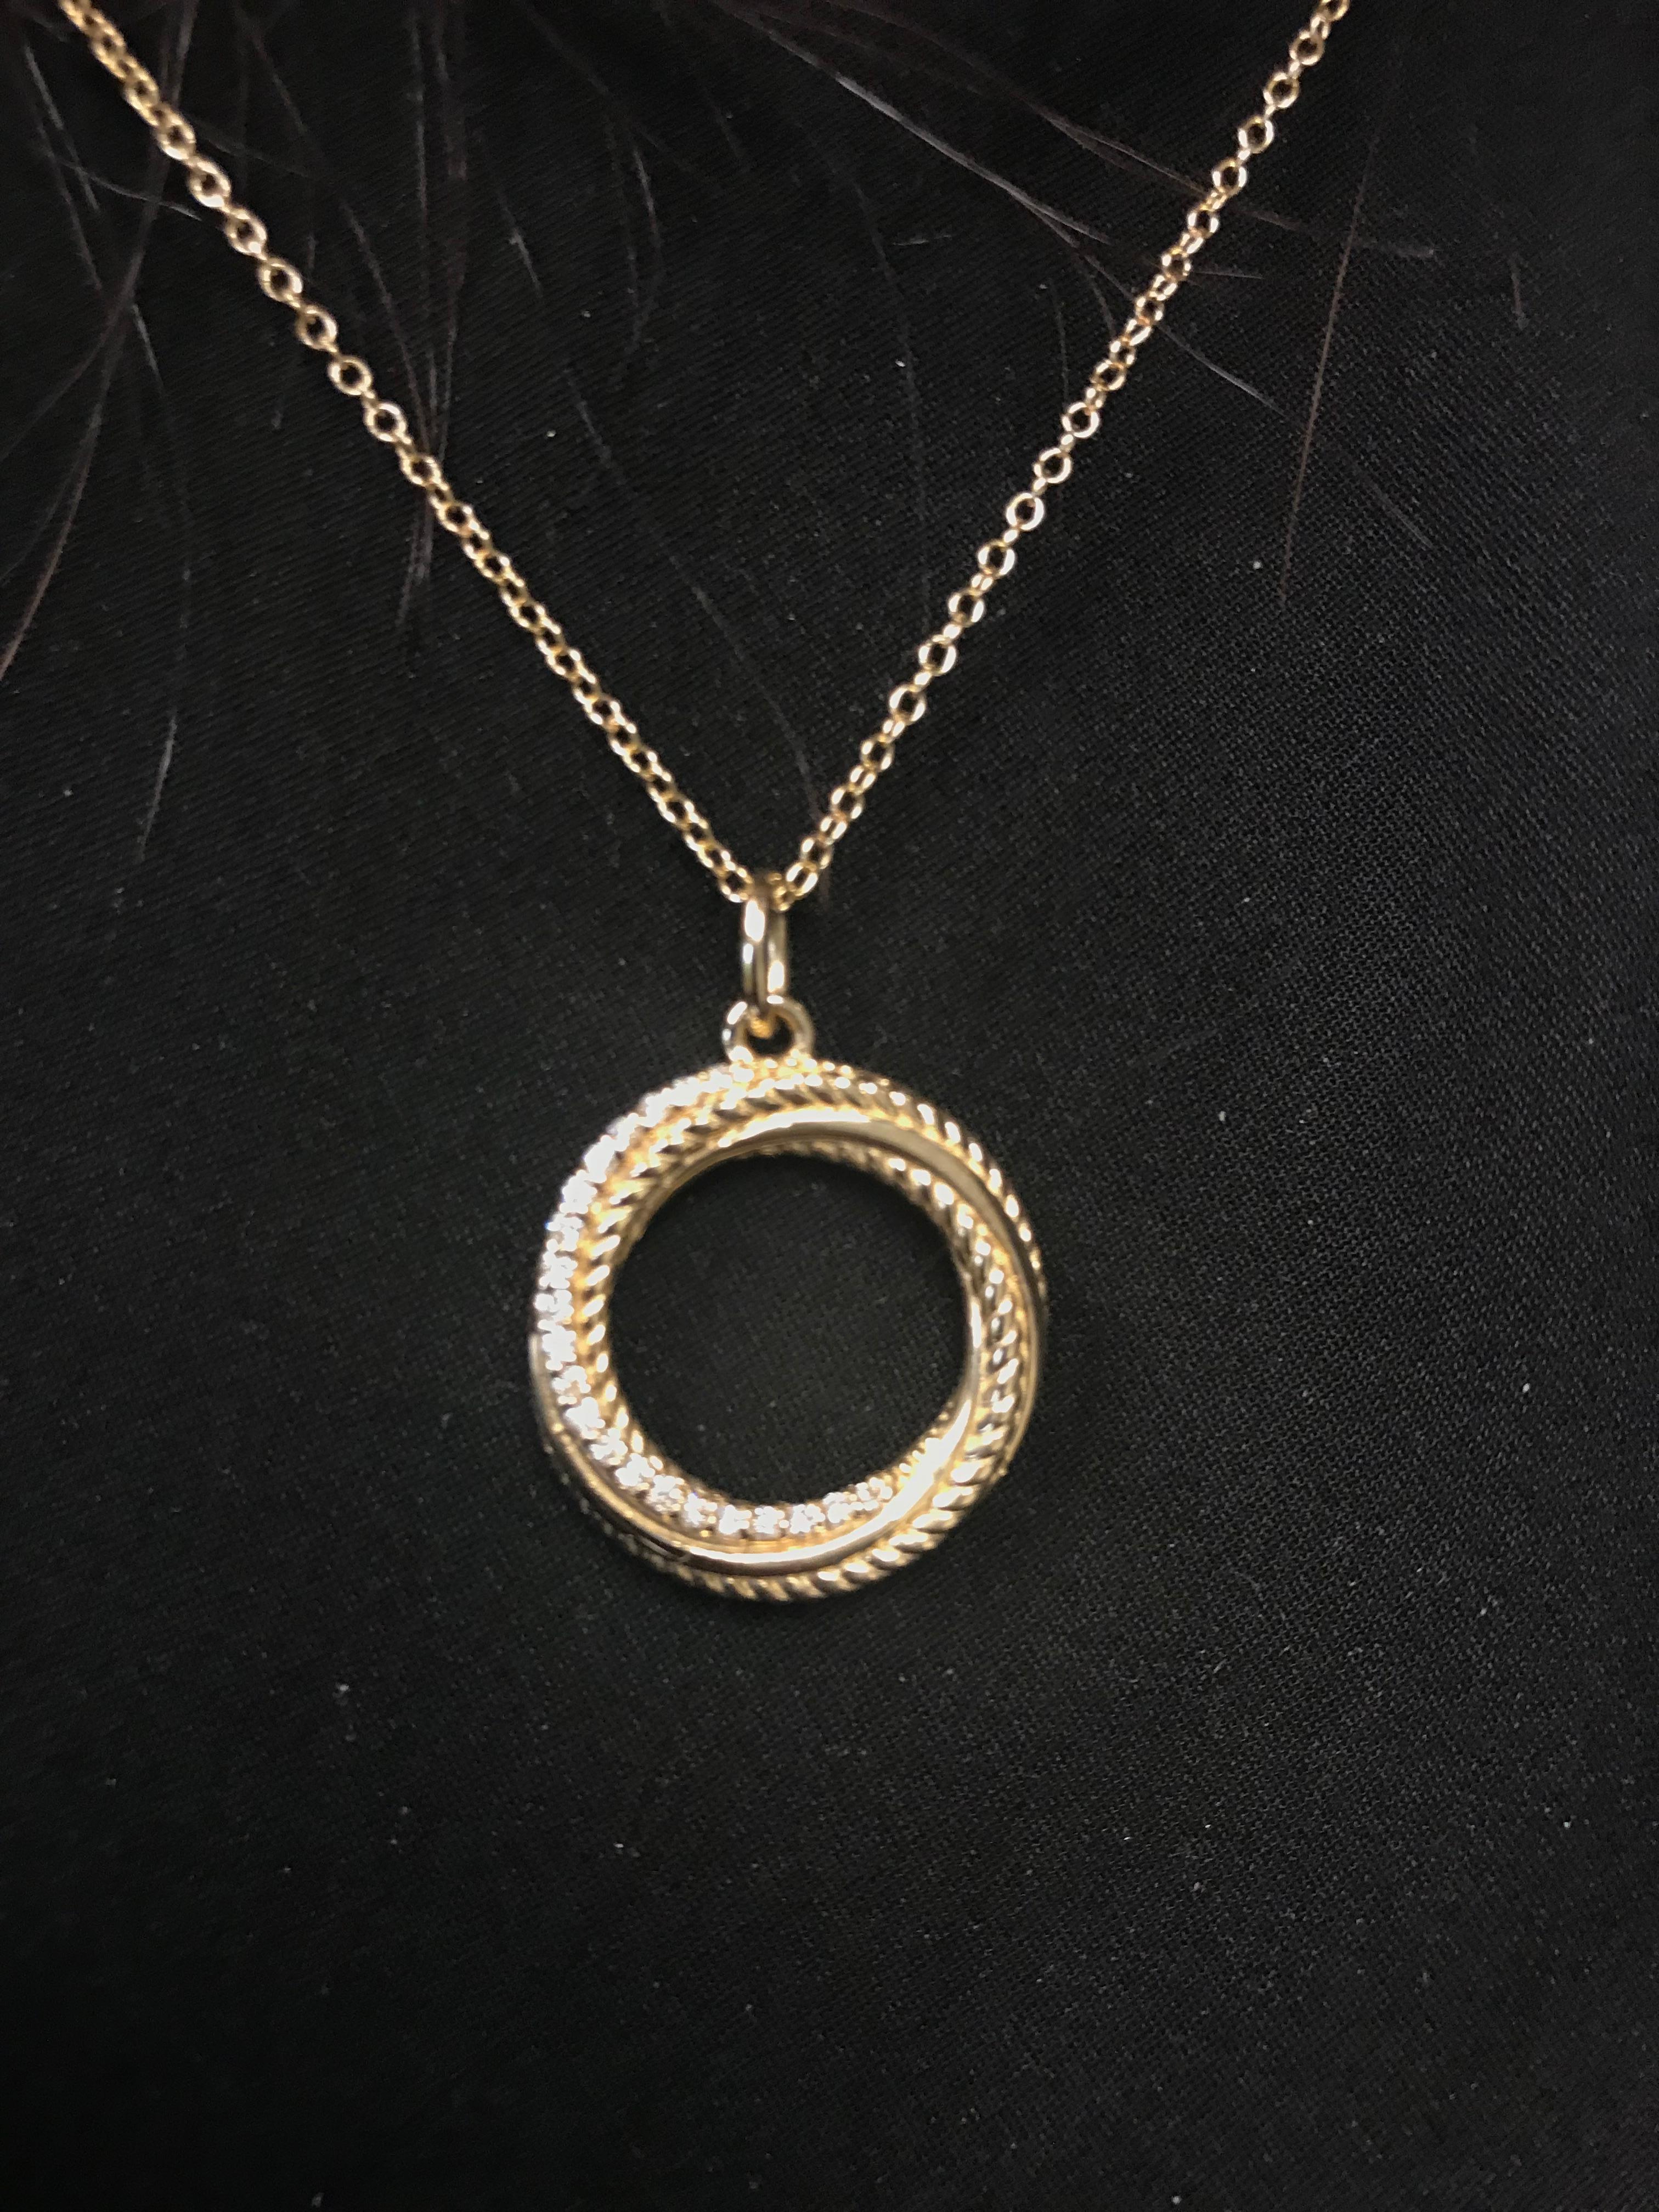 Circle pendant set in 14k yellow gold. The pendant diamond weight is 0.21 carats. The color is G, Clarity is SI1-SI2. This pendant is available in white and rose gold. This pendant has an elegant casual that can be worn in any occasion. 